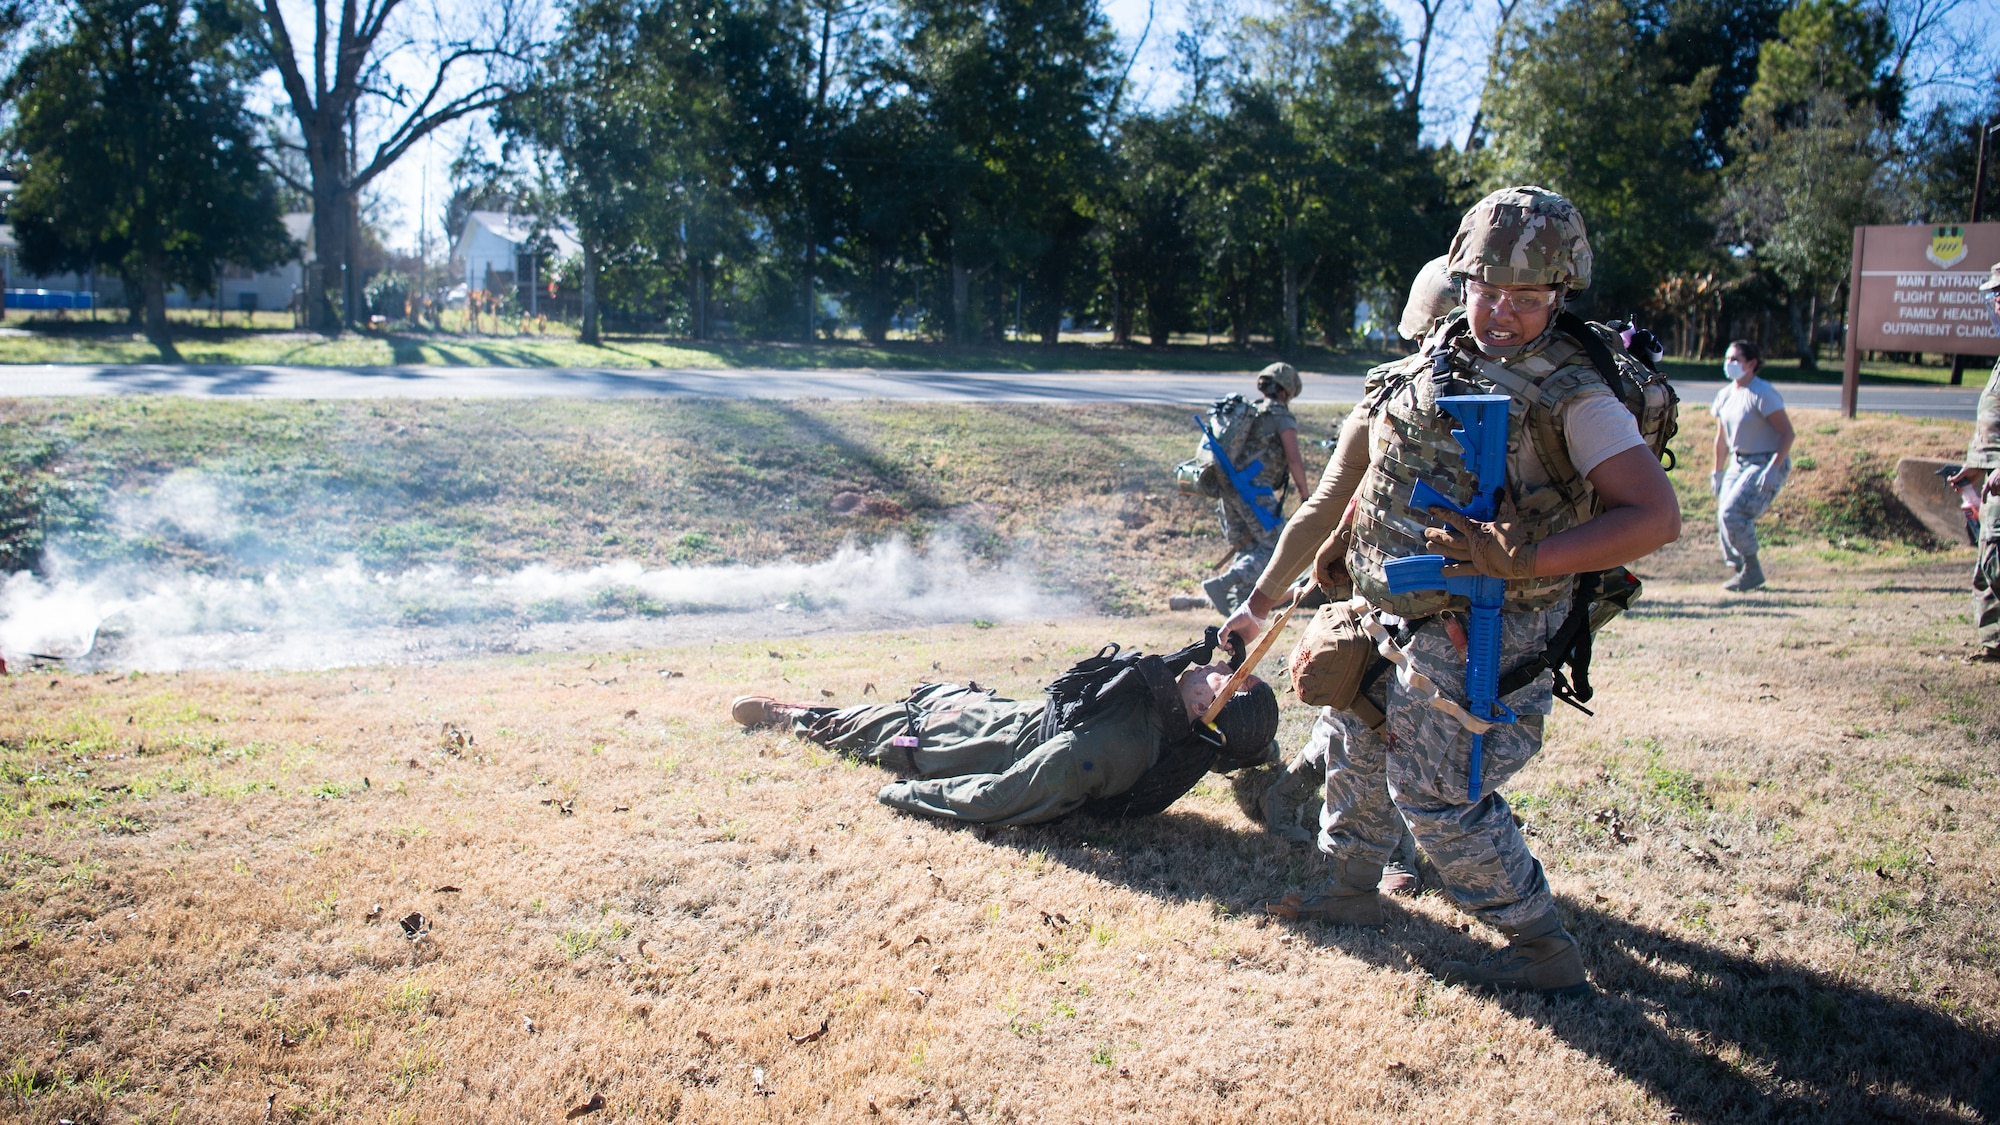 Image of Airmen conducting Tactical Combat Casualty Care.